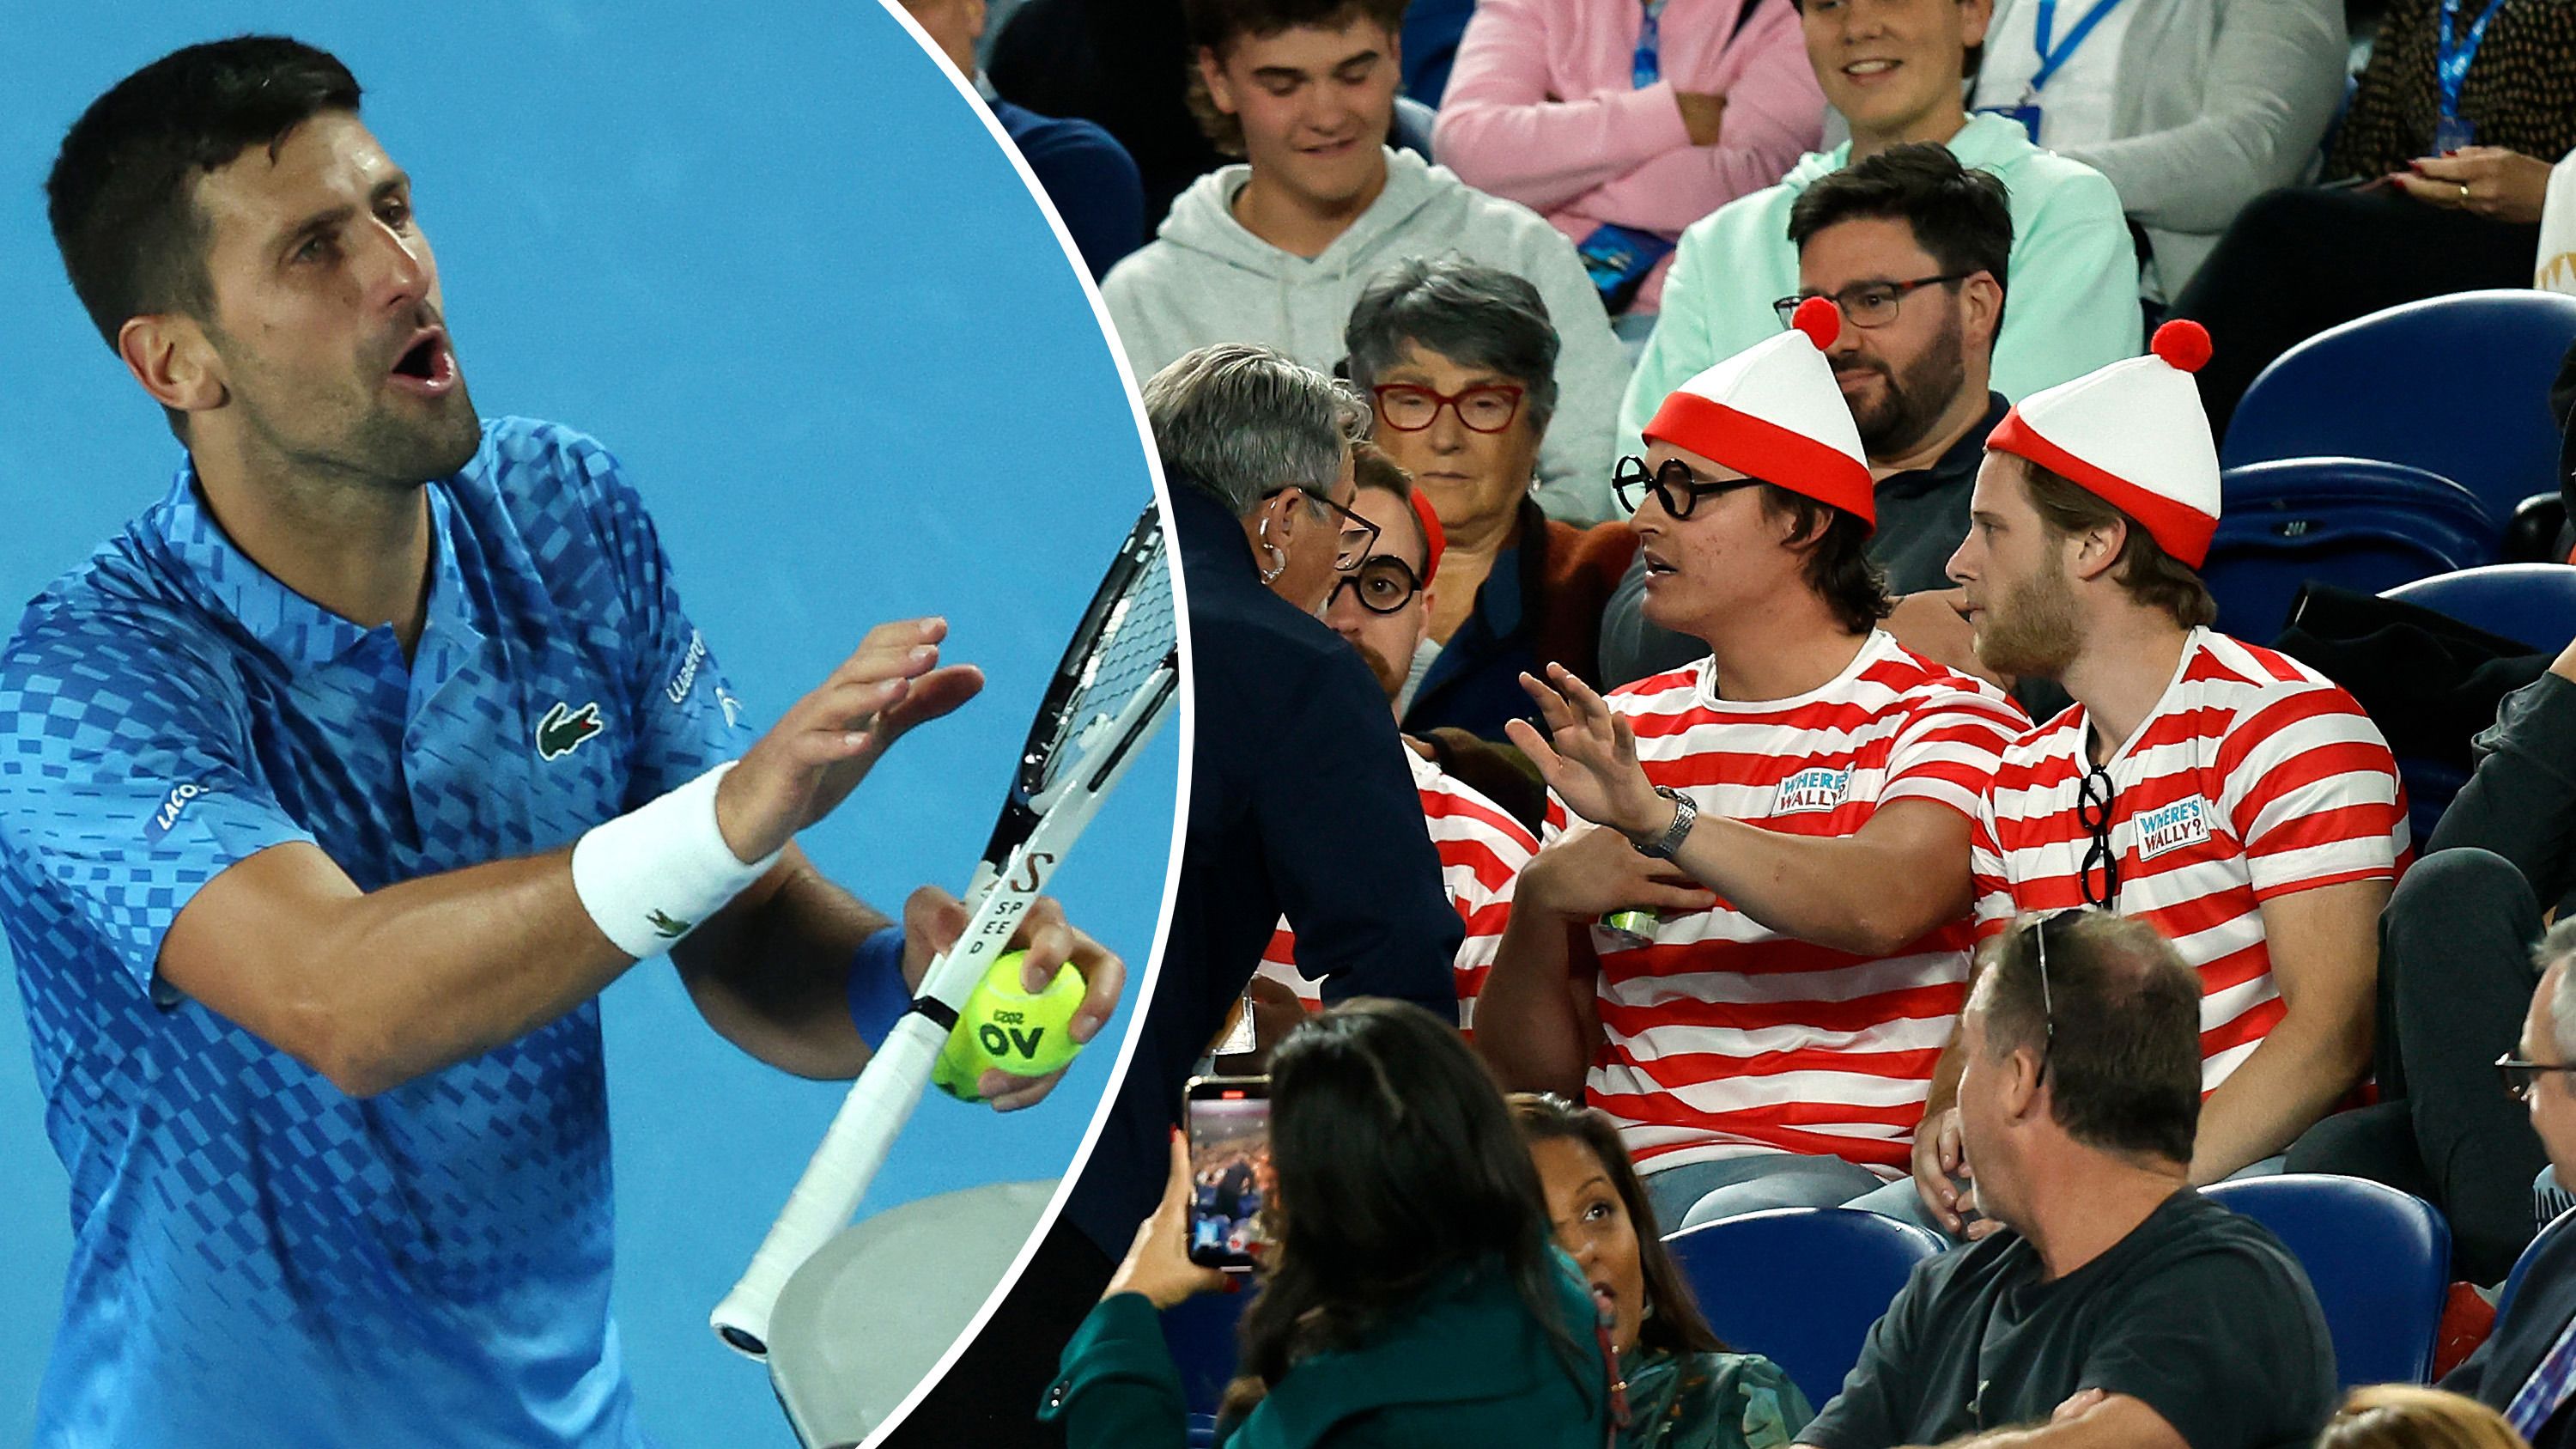 Novak Djokovic complained to the umpire before a group of fans were ejected by security.